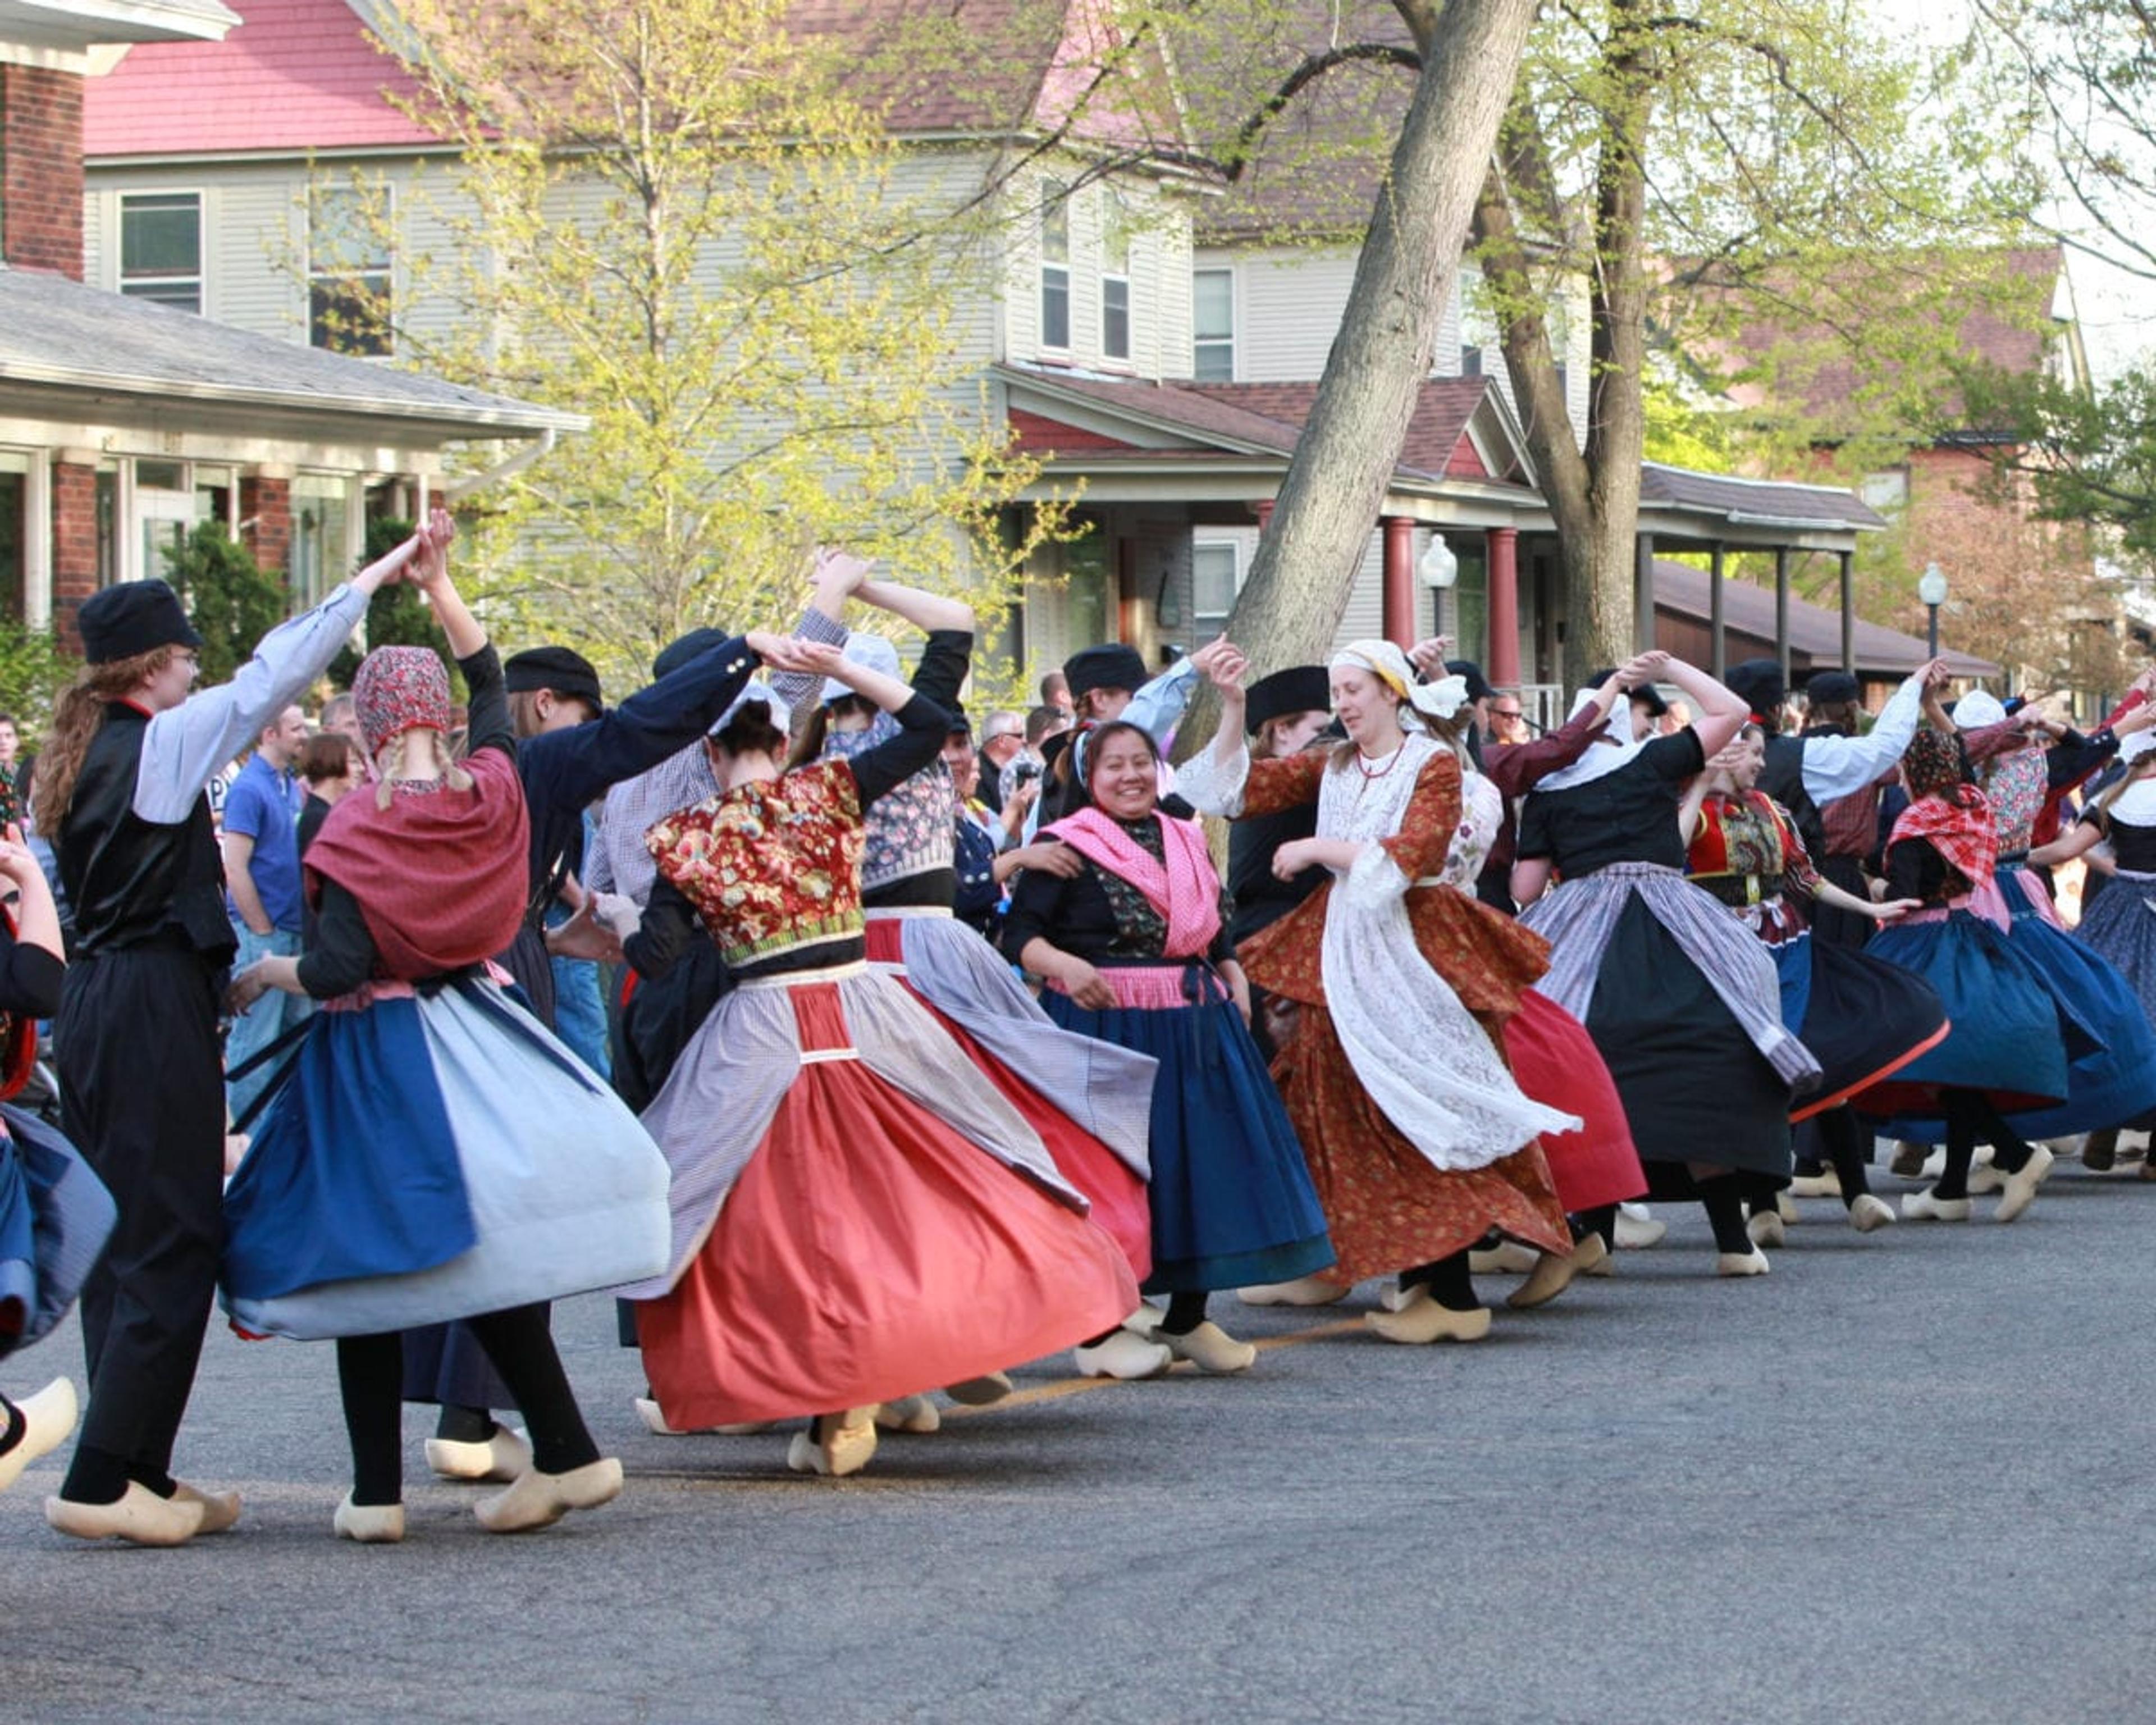 Dutch dancing is a must-see event at Tulip Time.